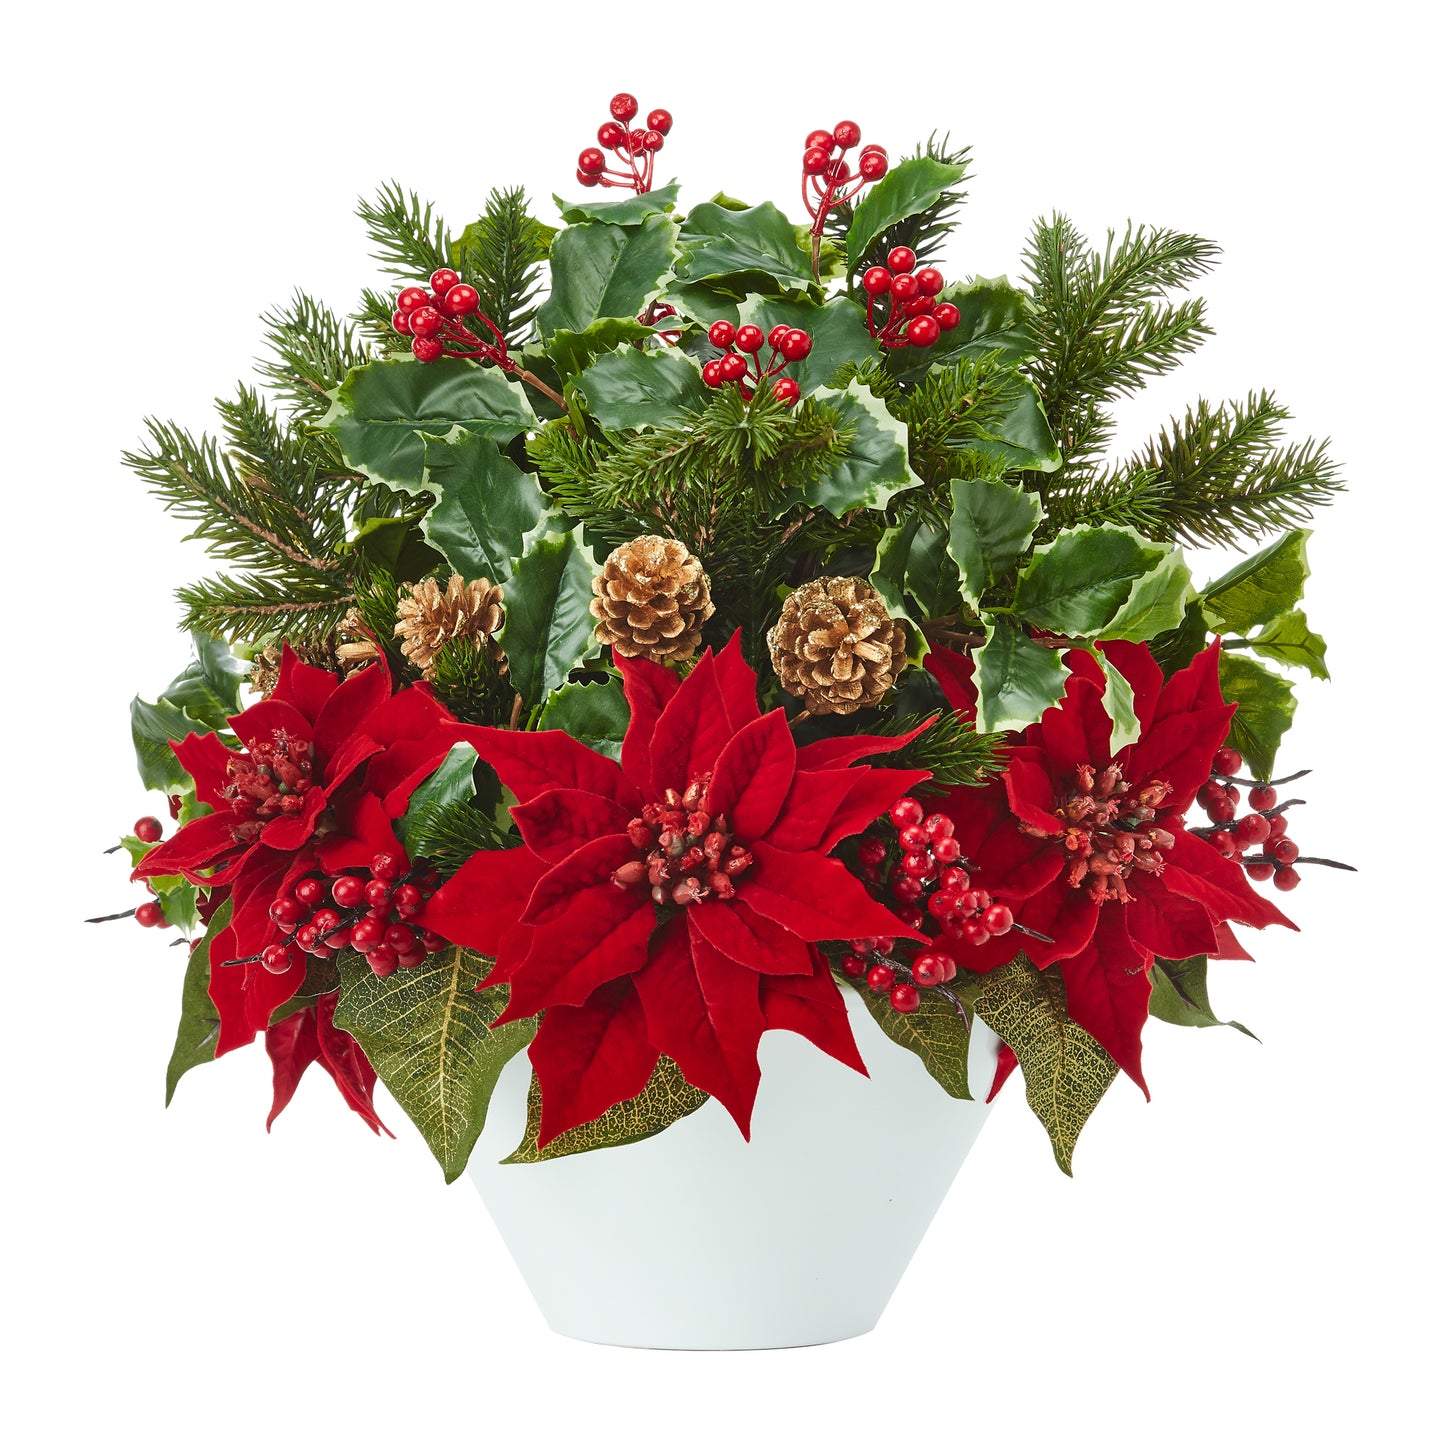 18” Poinsettia, Holly Leaf And Pine Artificial Arrangement In White Vase